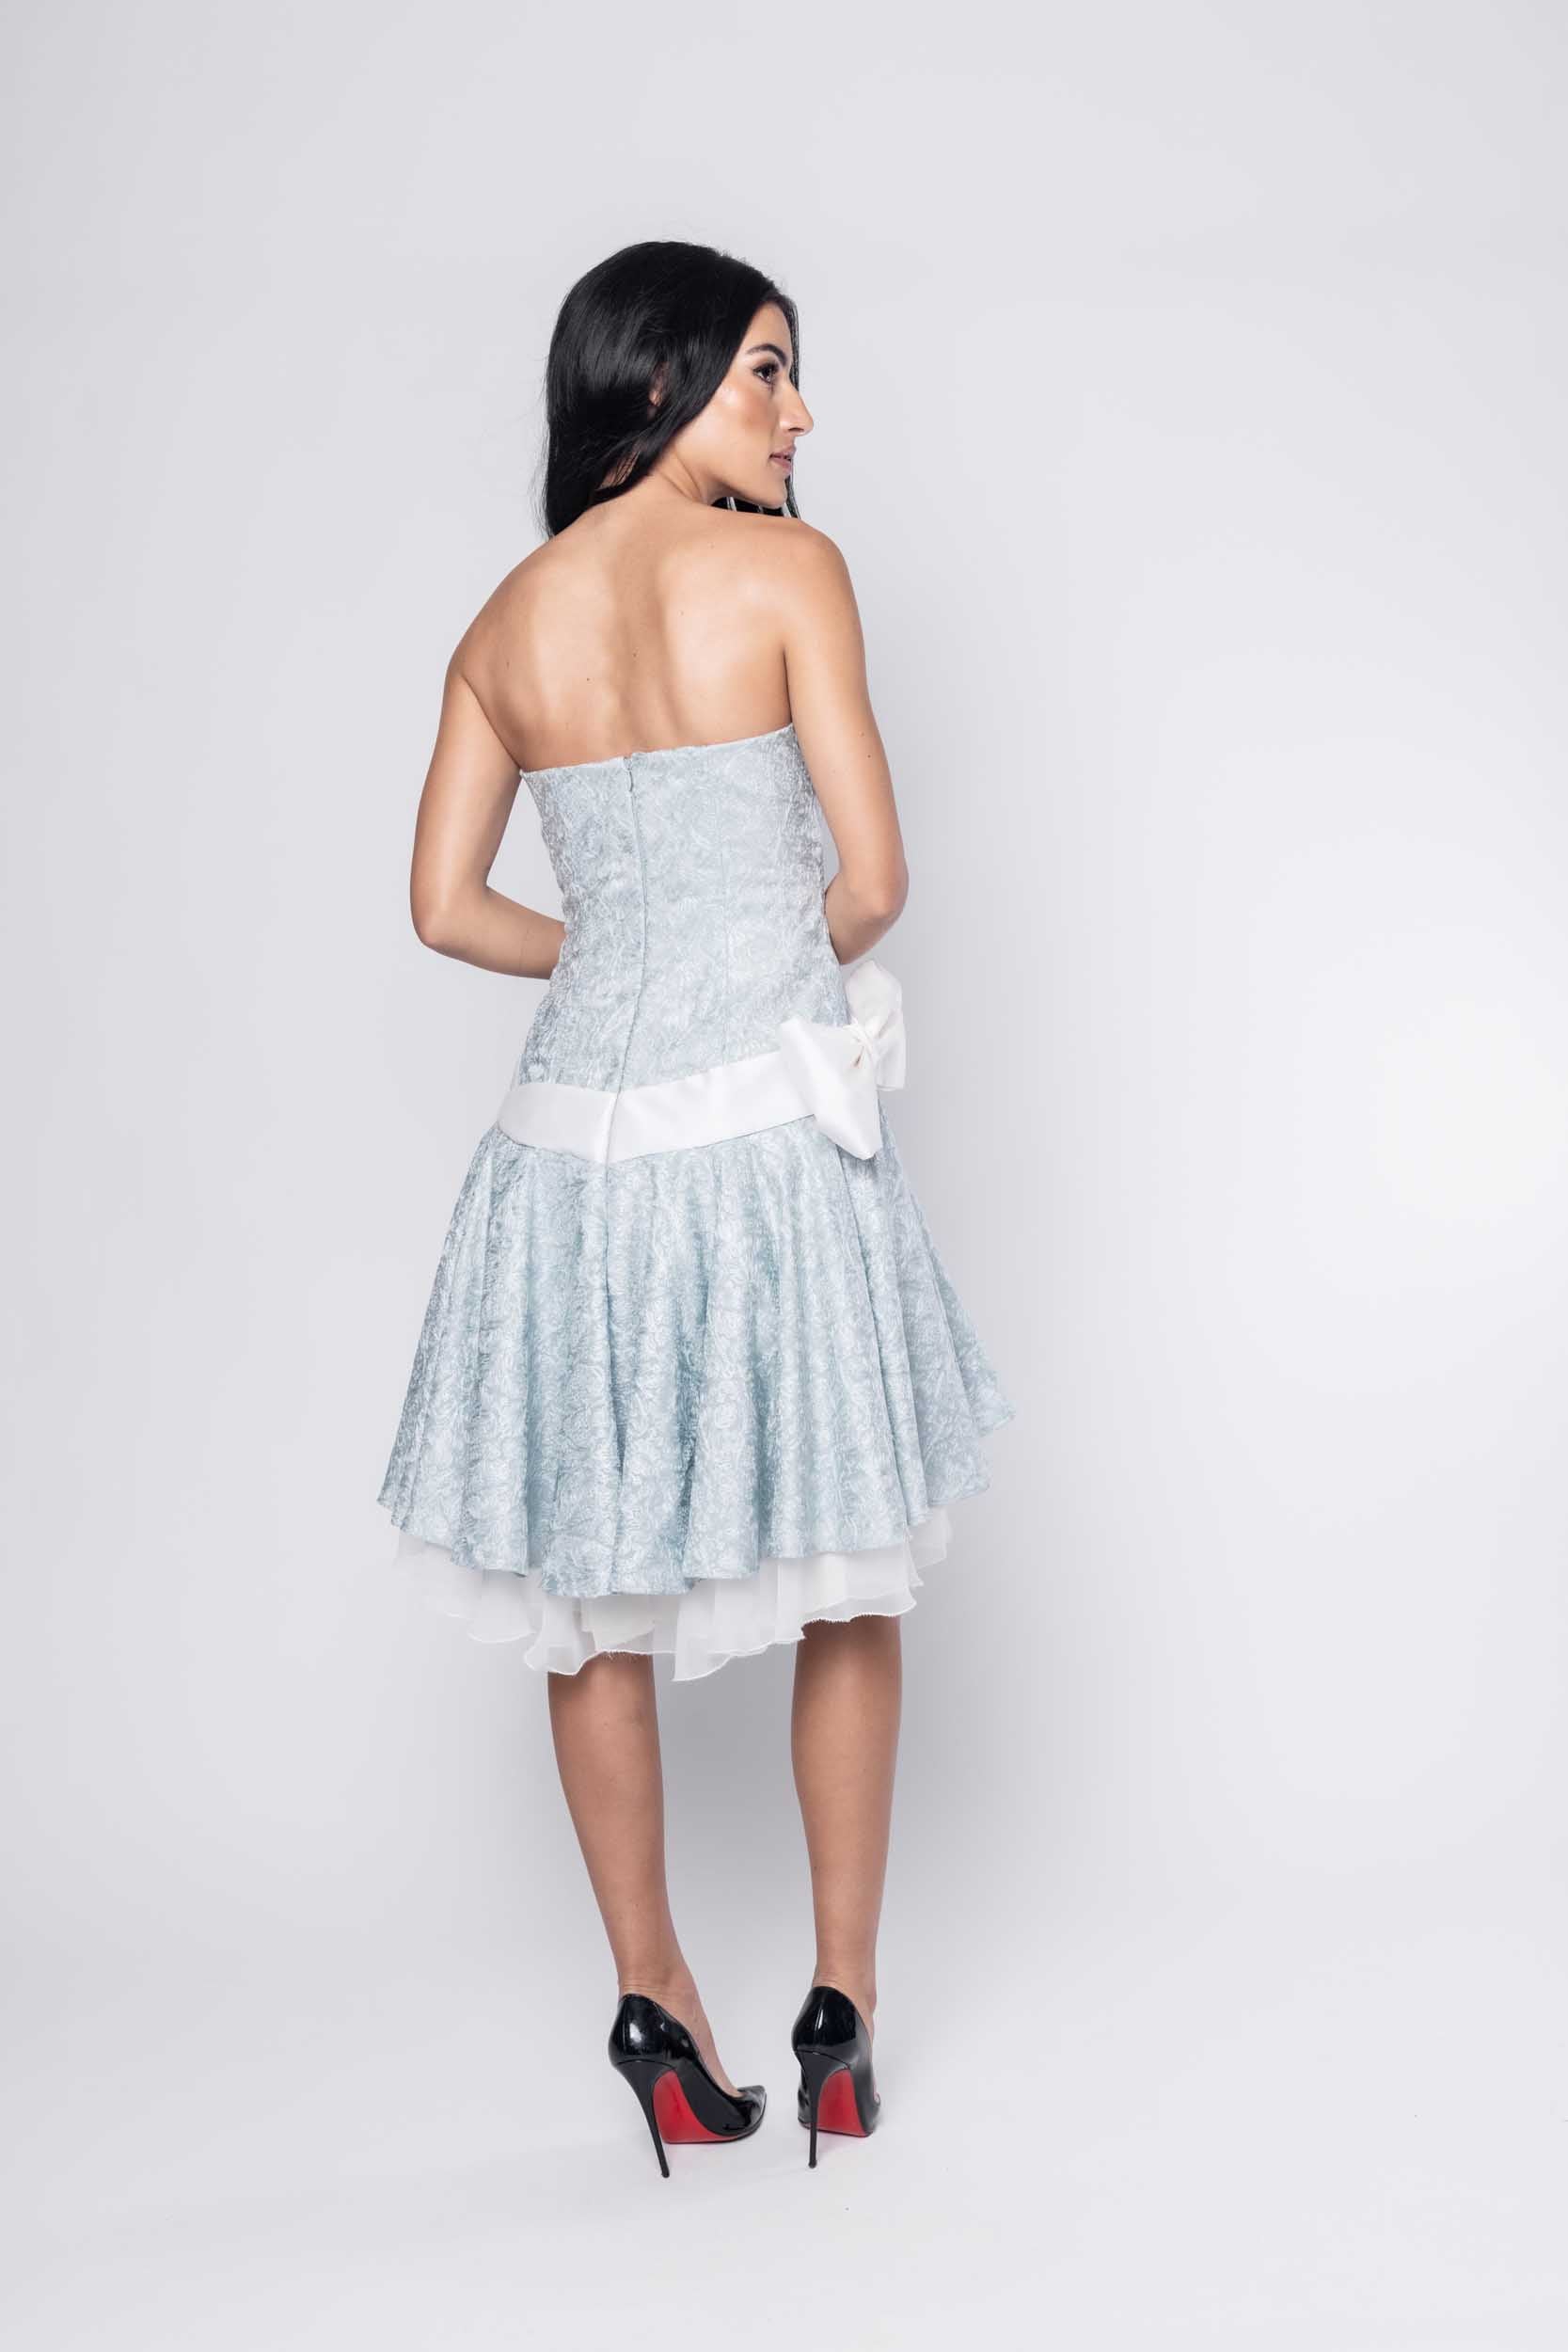 Beautiful model in blue Sujata Gazder cocktail dress with bow - back view